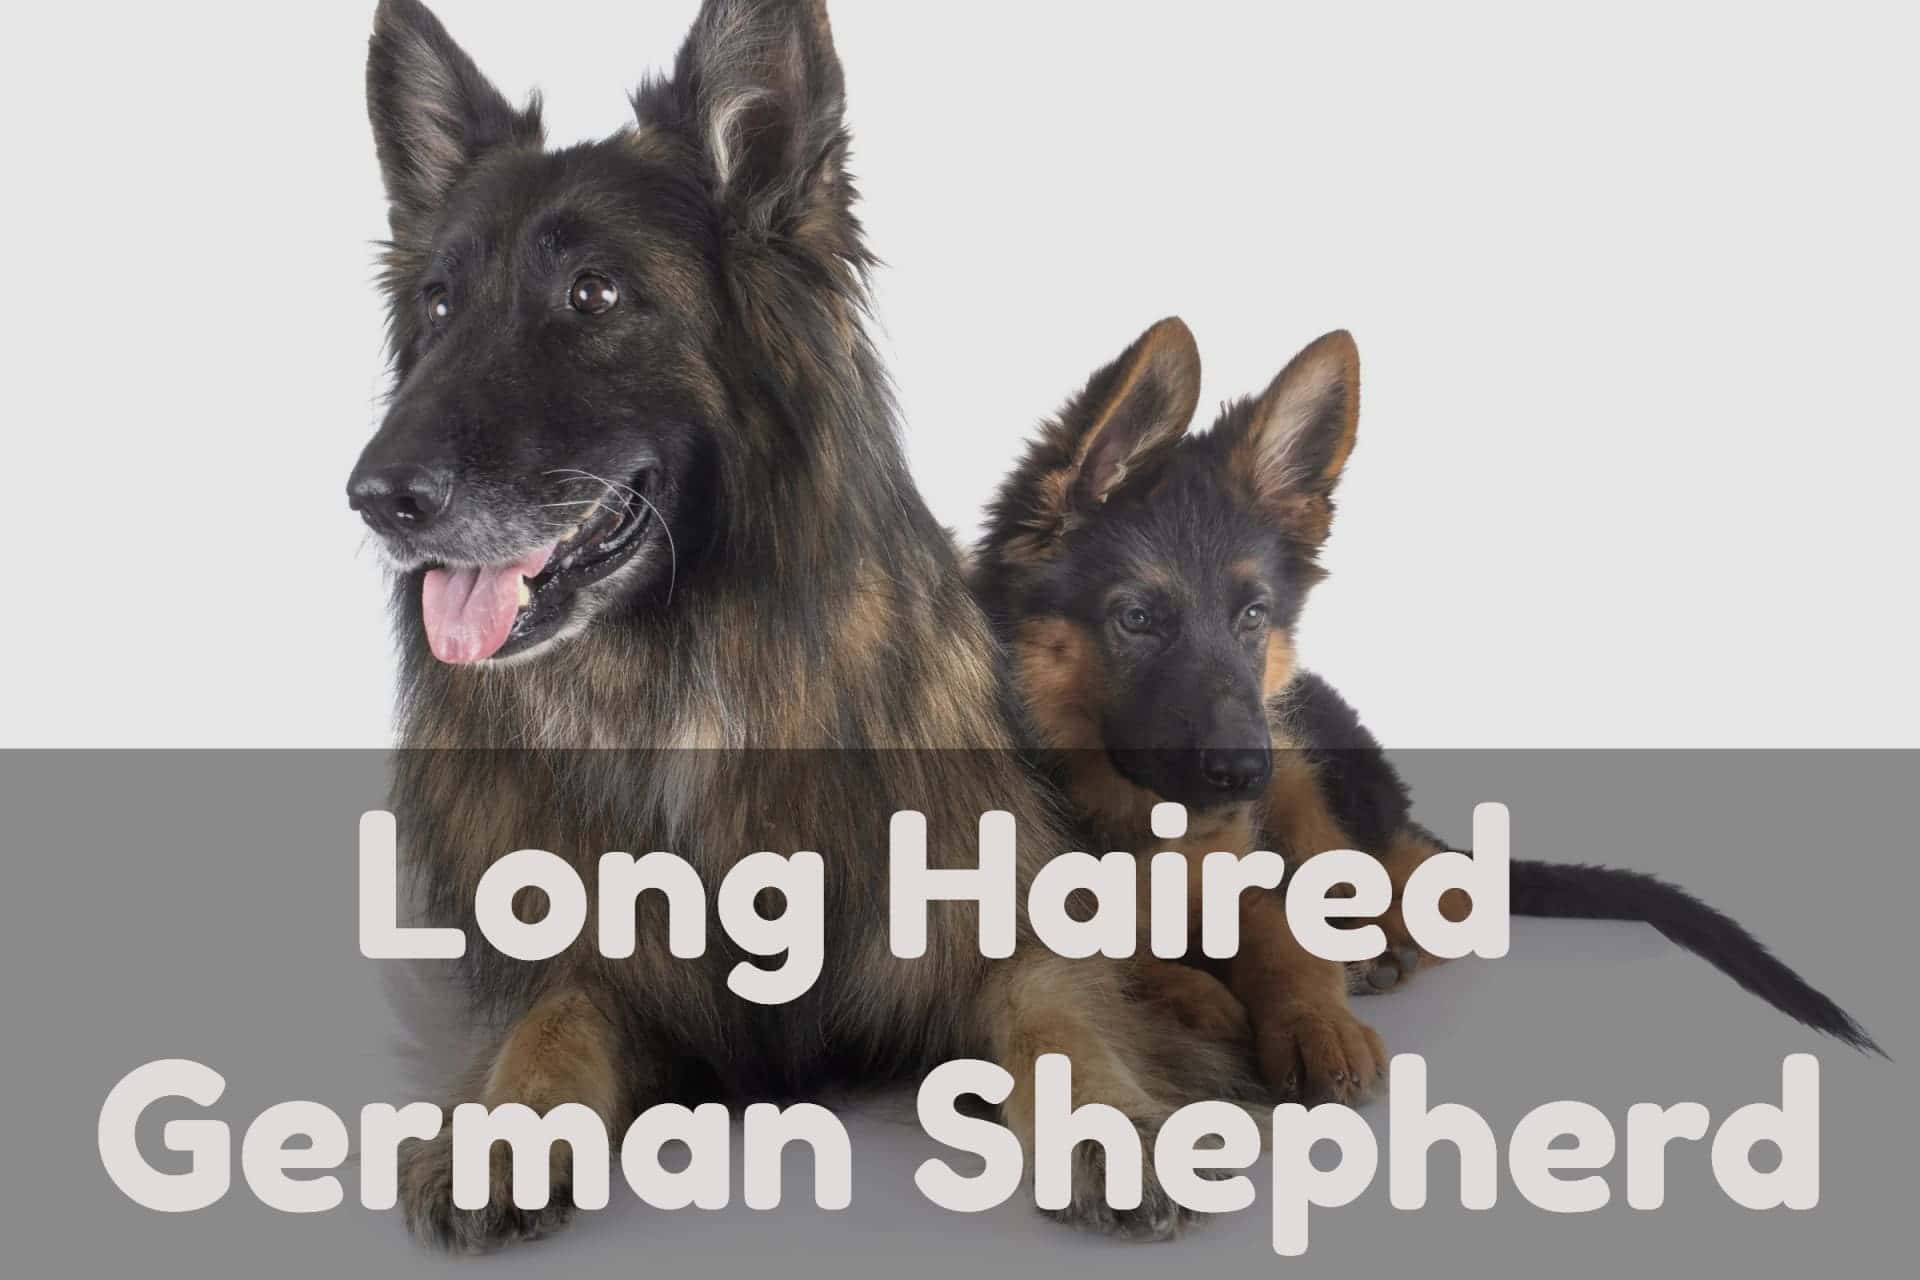 Long Haired German Shepherd - Puppies and Adult Dogs